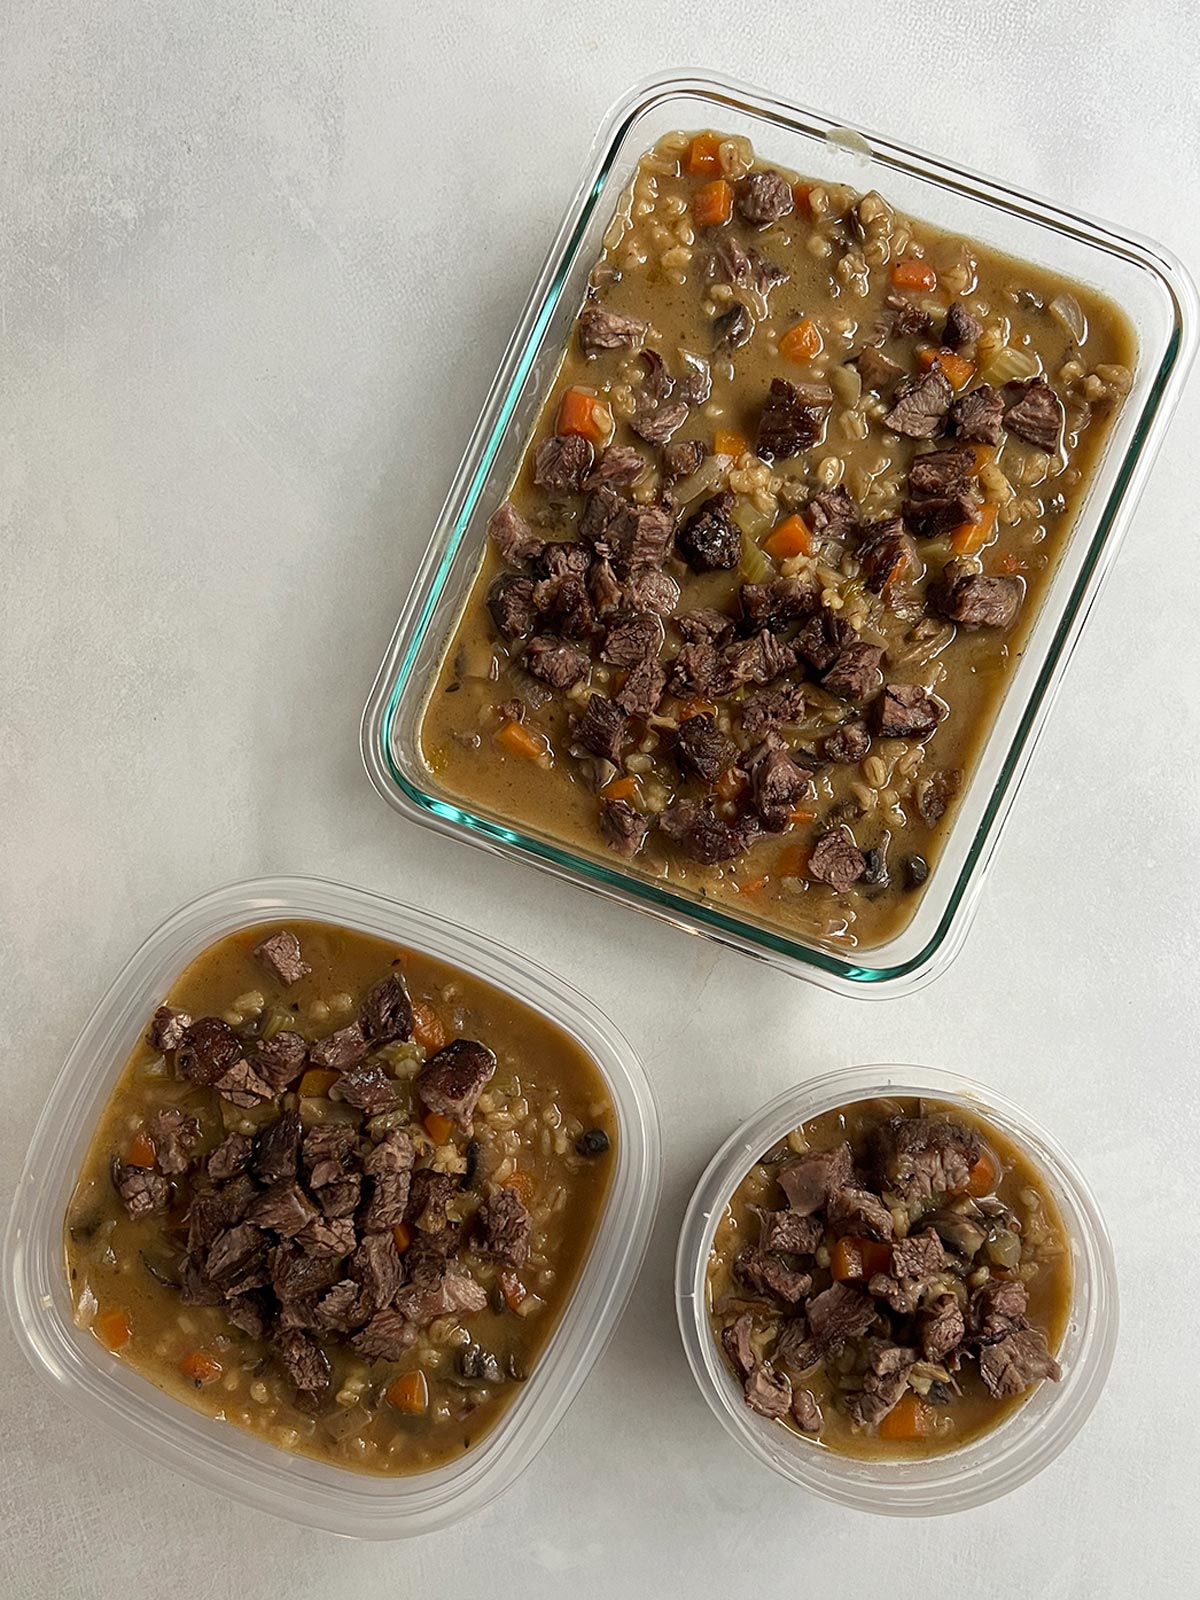 Beef mushroom barley soup in containers with meat added and ready to refrigerate.